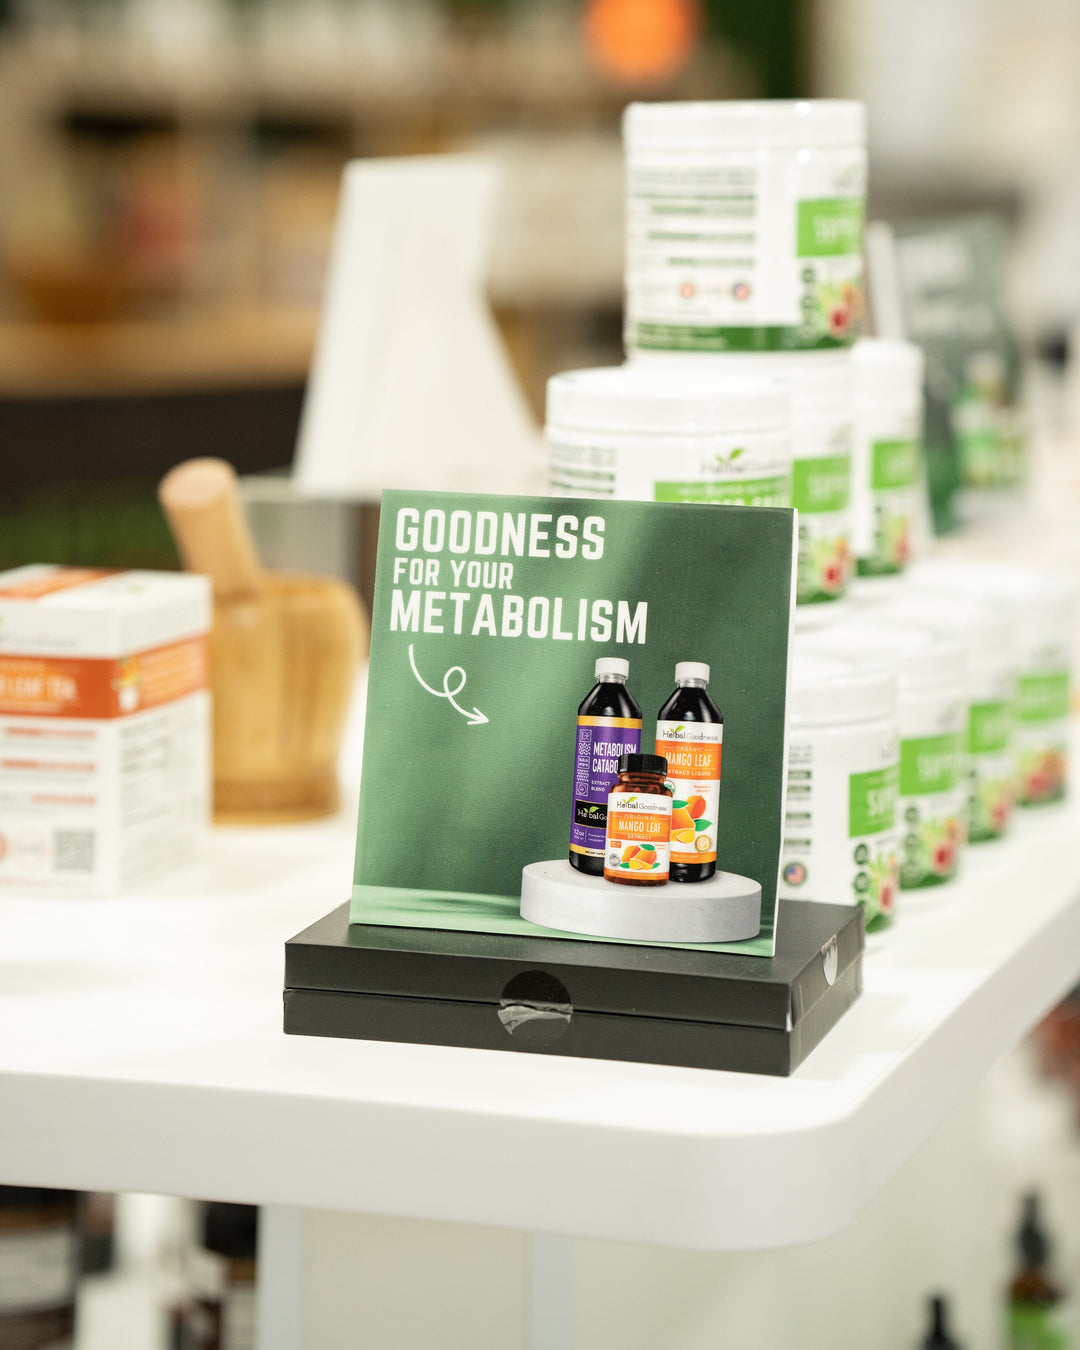 Herbal Goodness - A McKinney-Based Wellness Brand Got Featured in the The Dallas Morning News